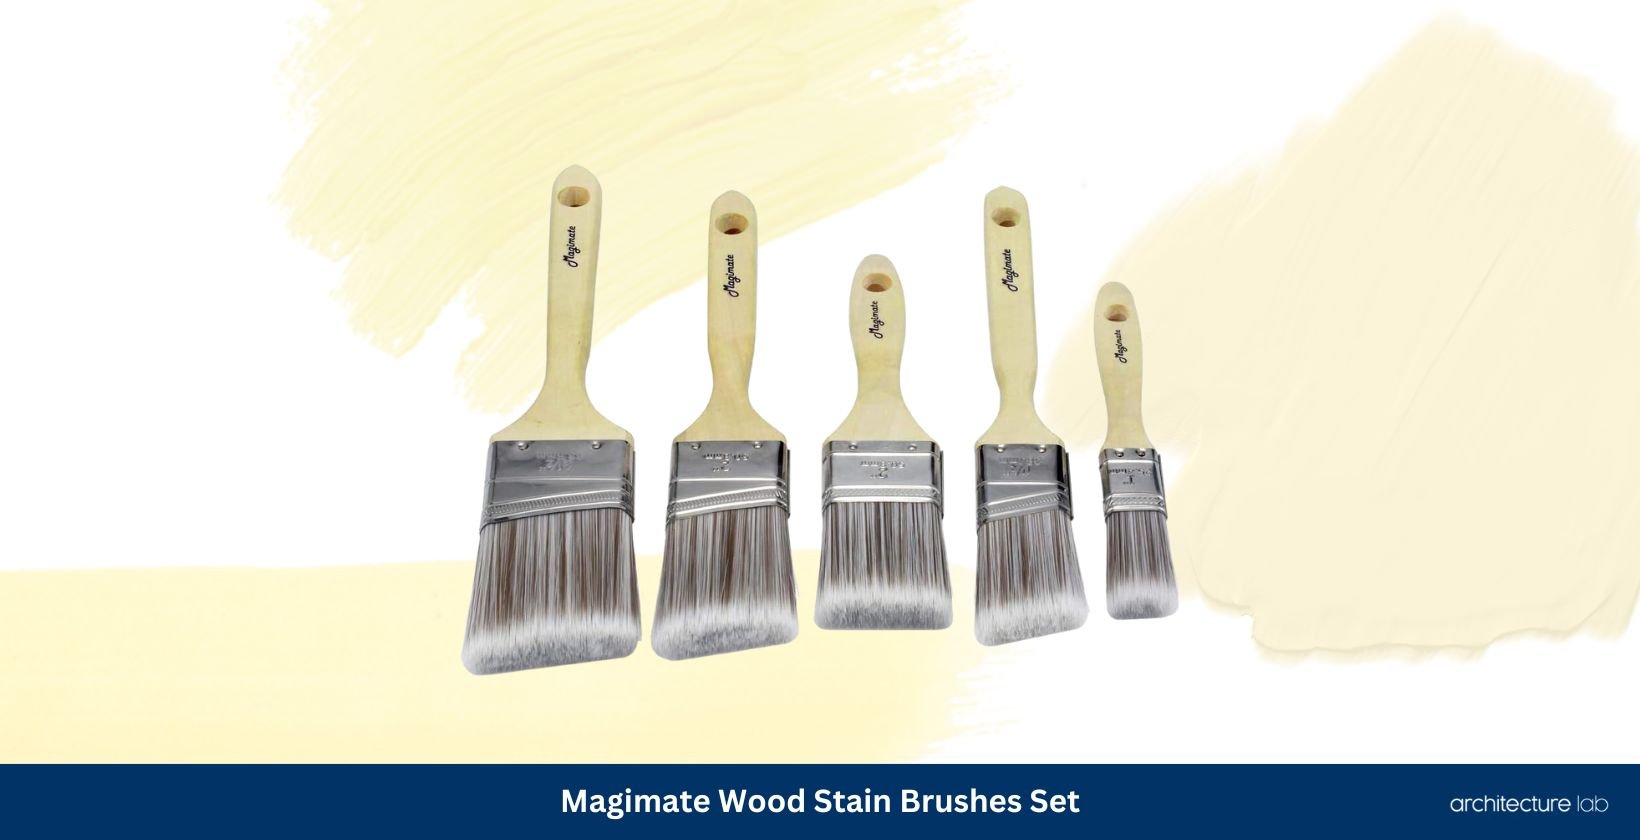 Magimate wood stain